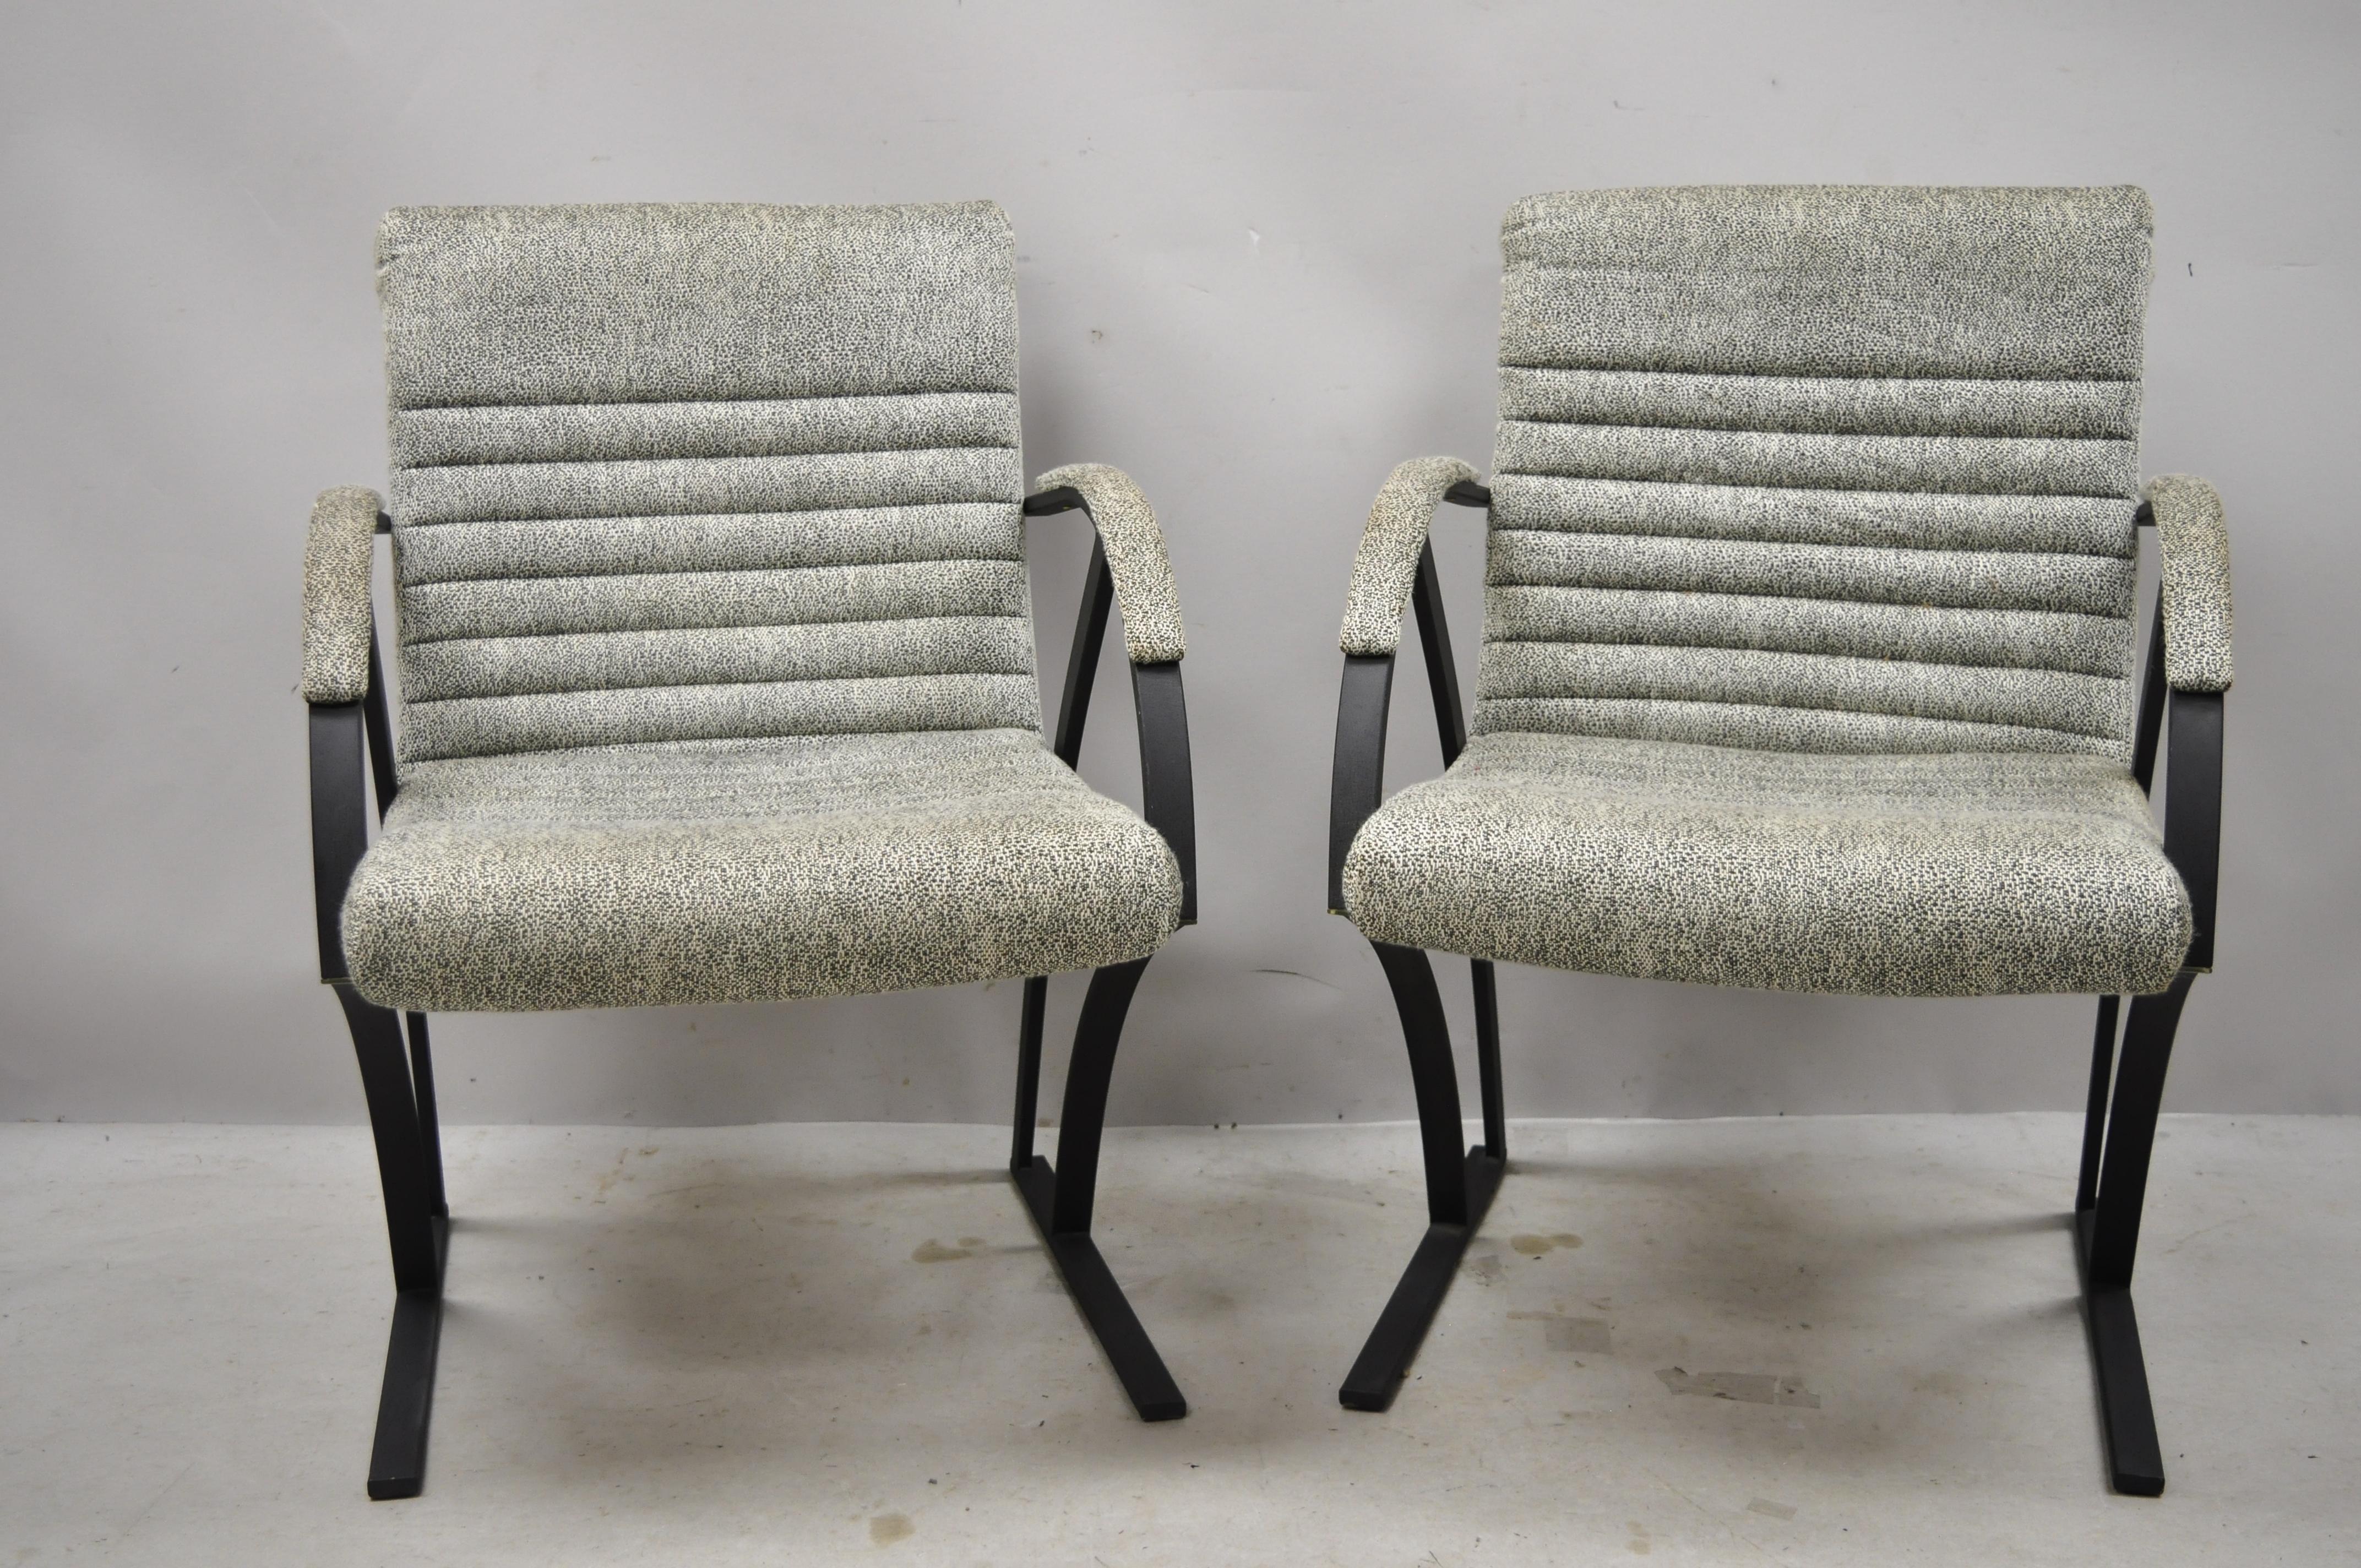 Mid Century Cal-Style Furniture Art Deco Metal Frame Lounge Arm Chairs B - Pair. Item features chanel back and seats, upholstered armrests, original label, clean modernist lines, sleek sculptural form. Circa Mid to Late 20th Century.
Measurements: